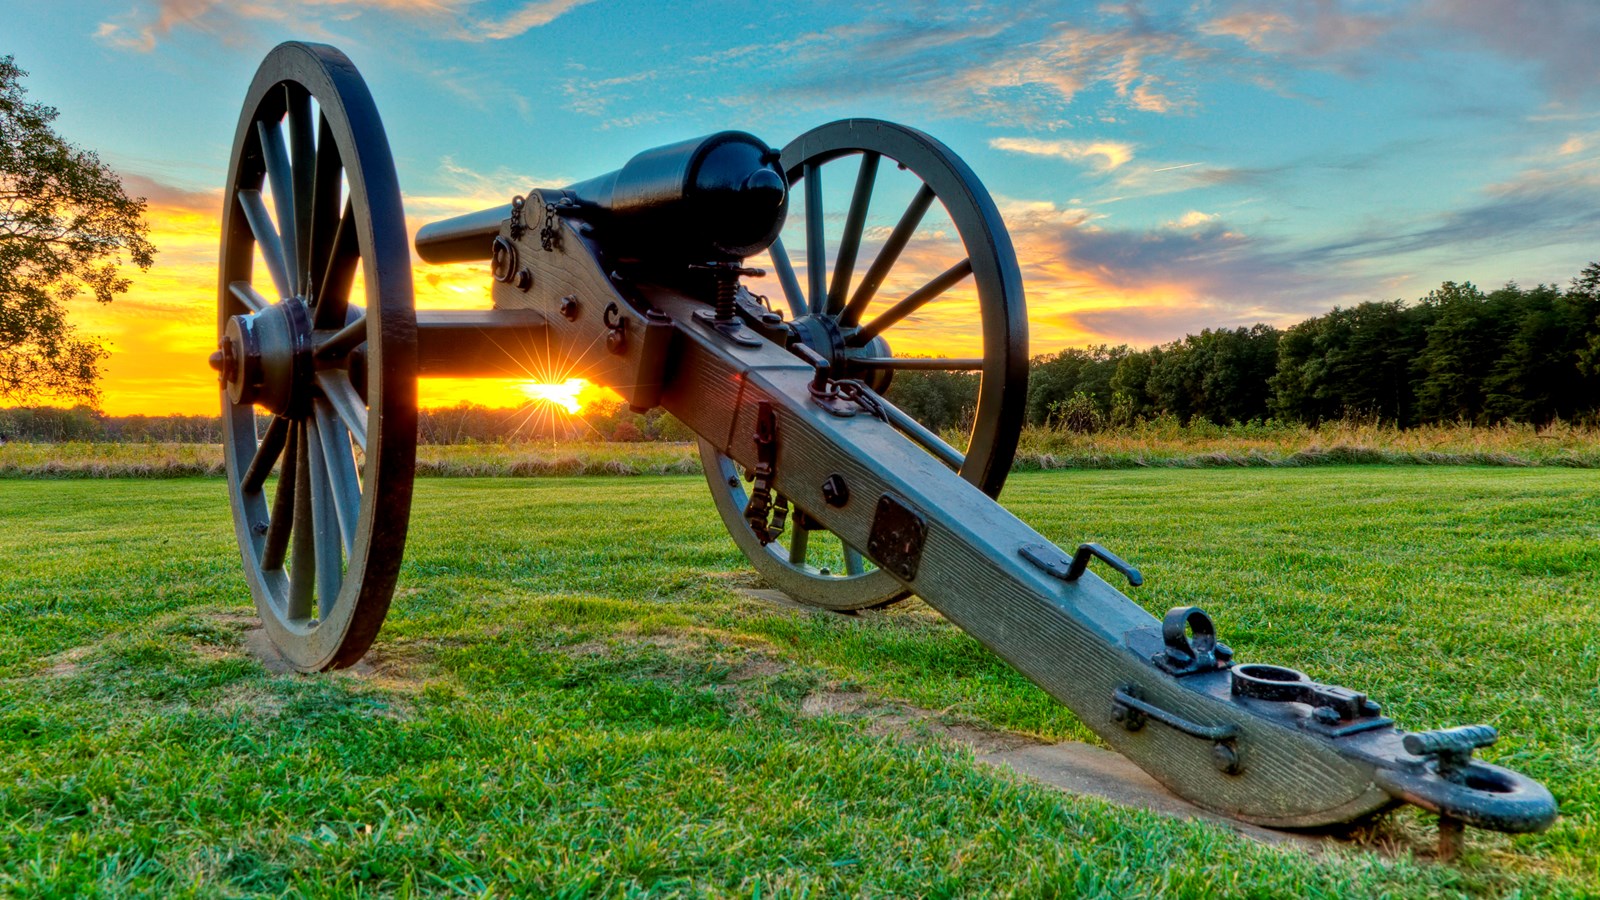 A cannon in a field at sunset.